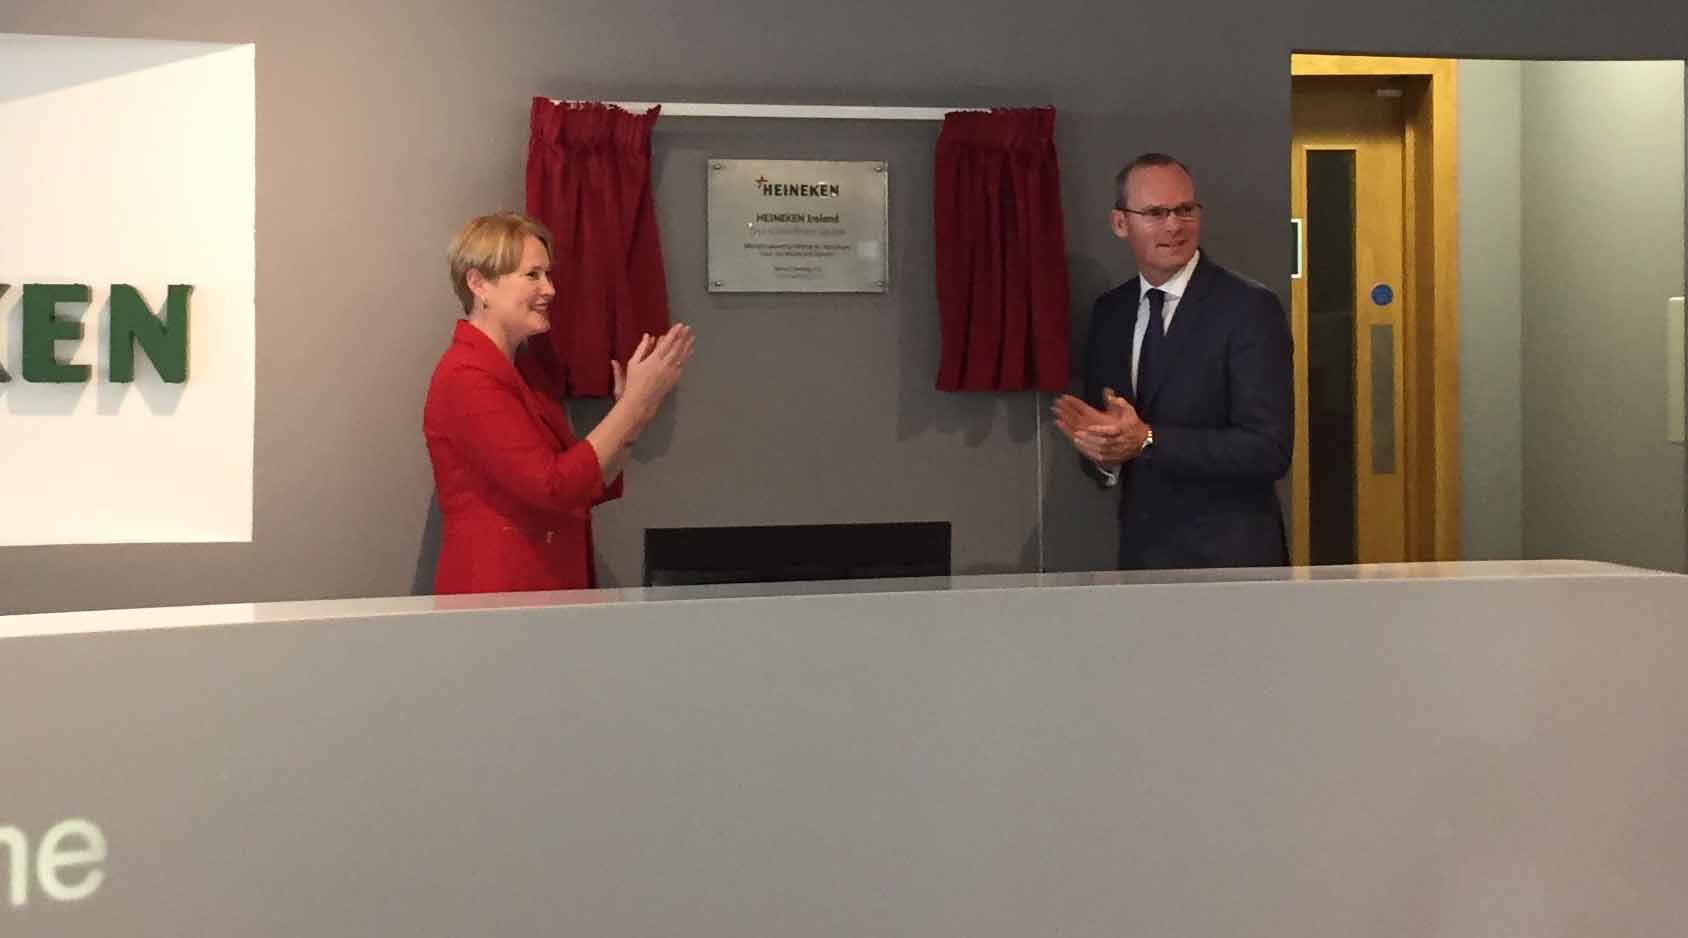 The Minister for the Agriculture, Food, the Marine & Defence Mr Simon Coveney TD opening Heineken Ireland’s new state-of-the-art offices at One Kilmainham Square in Dublin this morning.